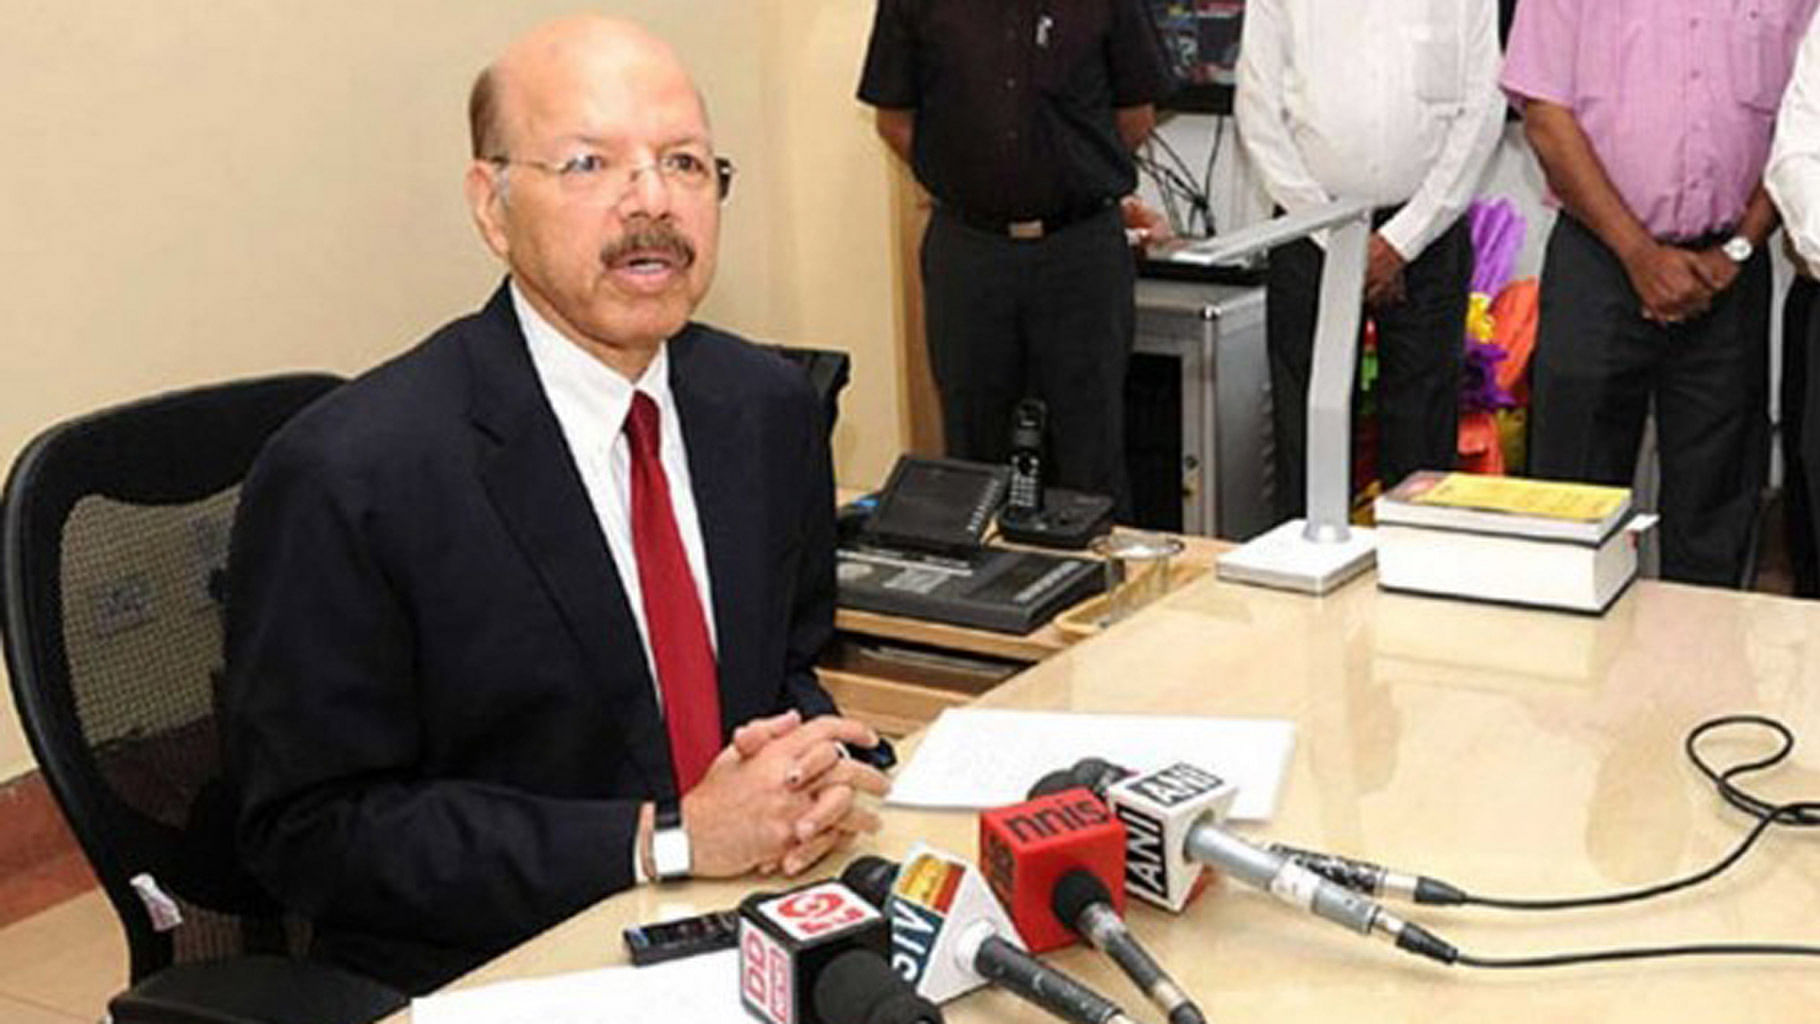  Chief Election Commissioner Nasim Zaidi and Election Commissioner AK Joti met on Thursday to decide the fate of the elections. (Photo: PIB)